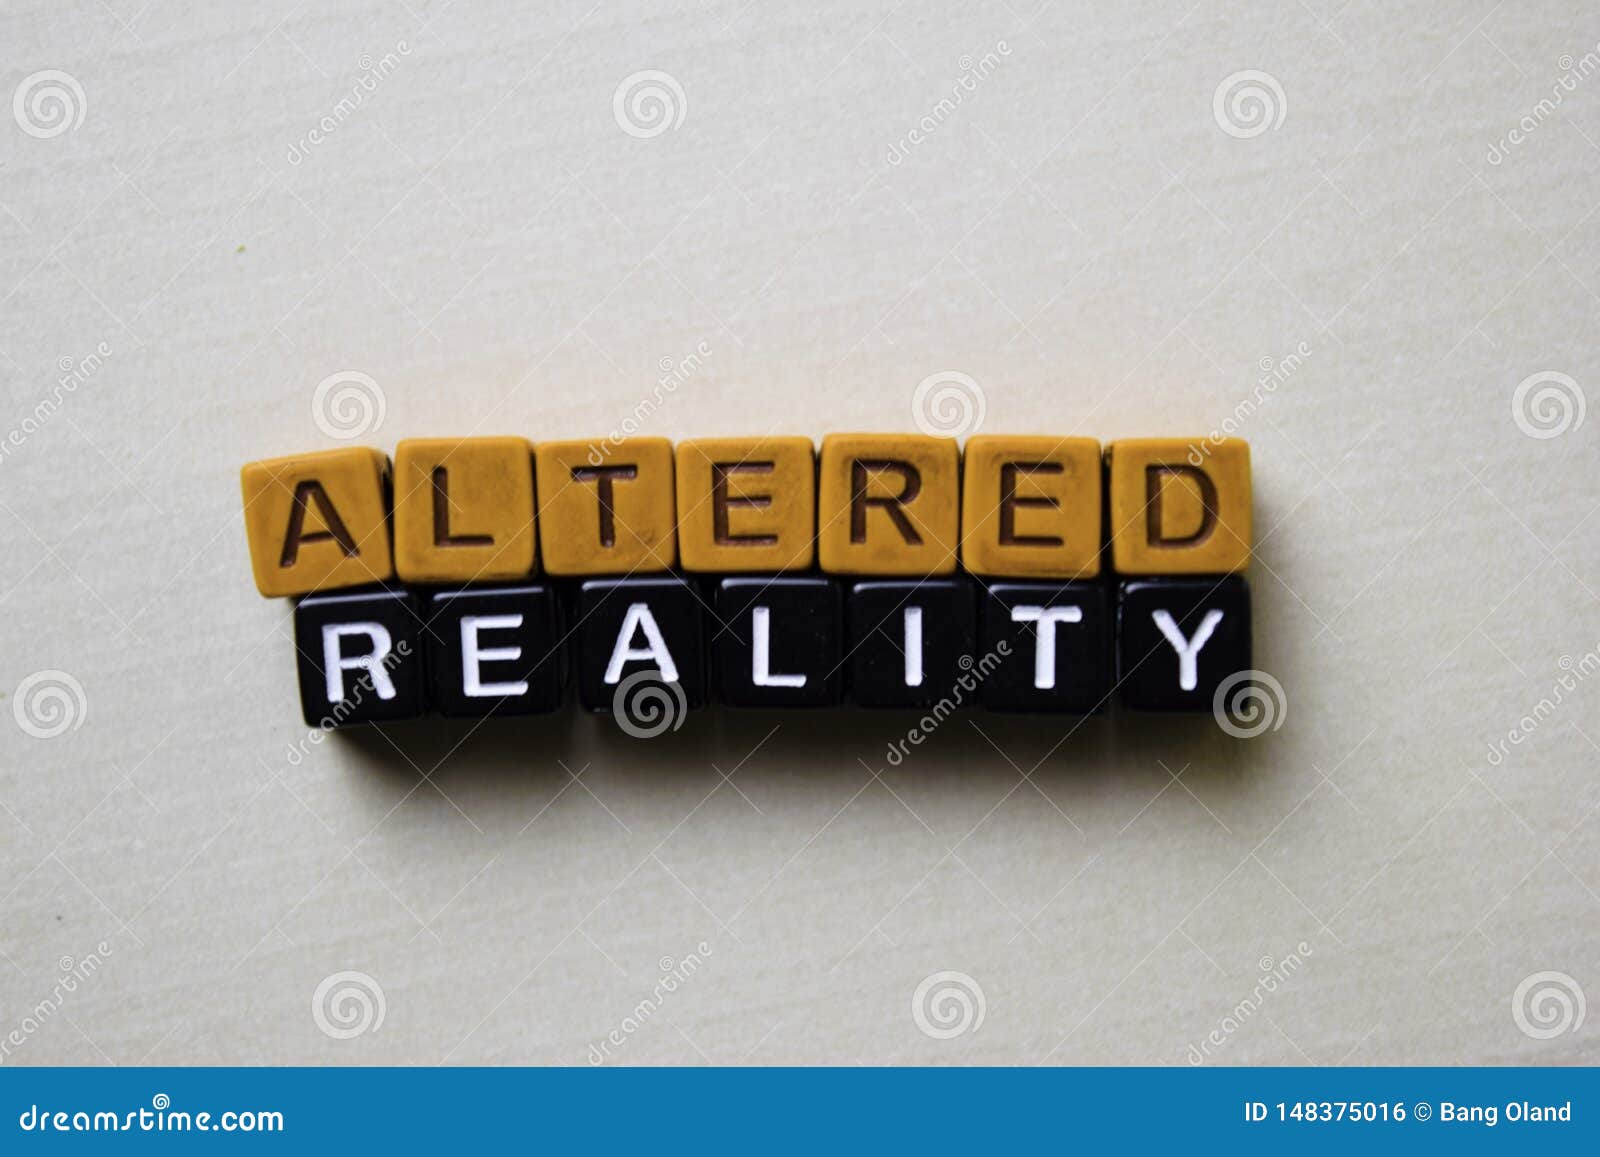 altered reality on wooden blocks. business and inspiration concept